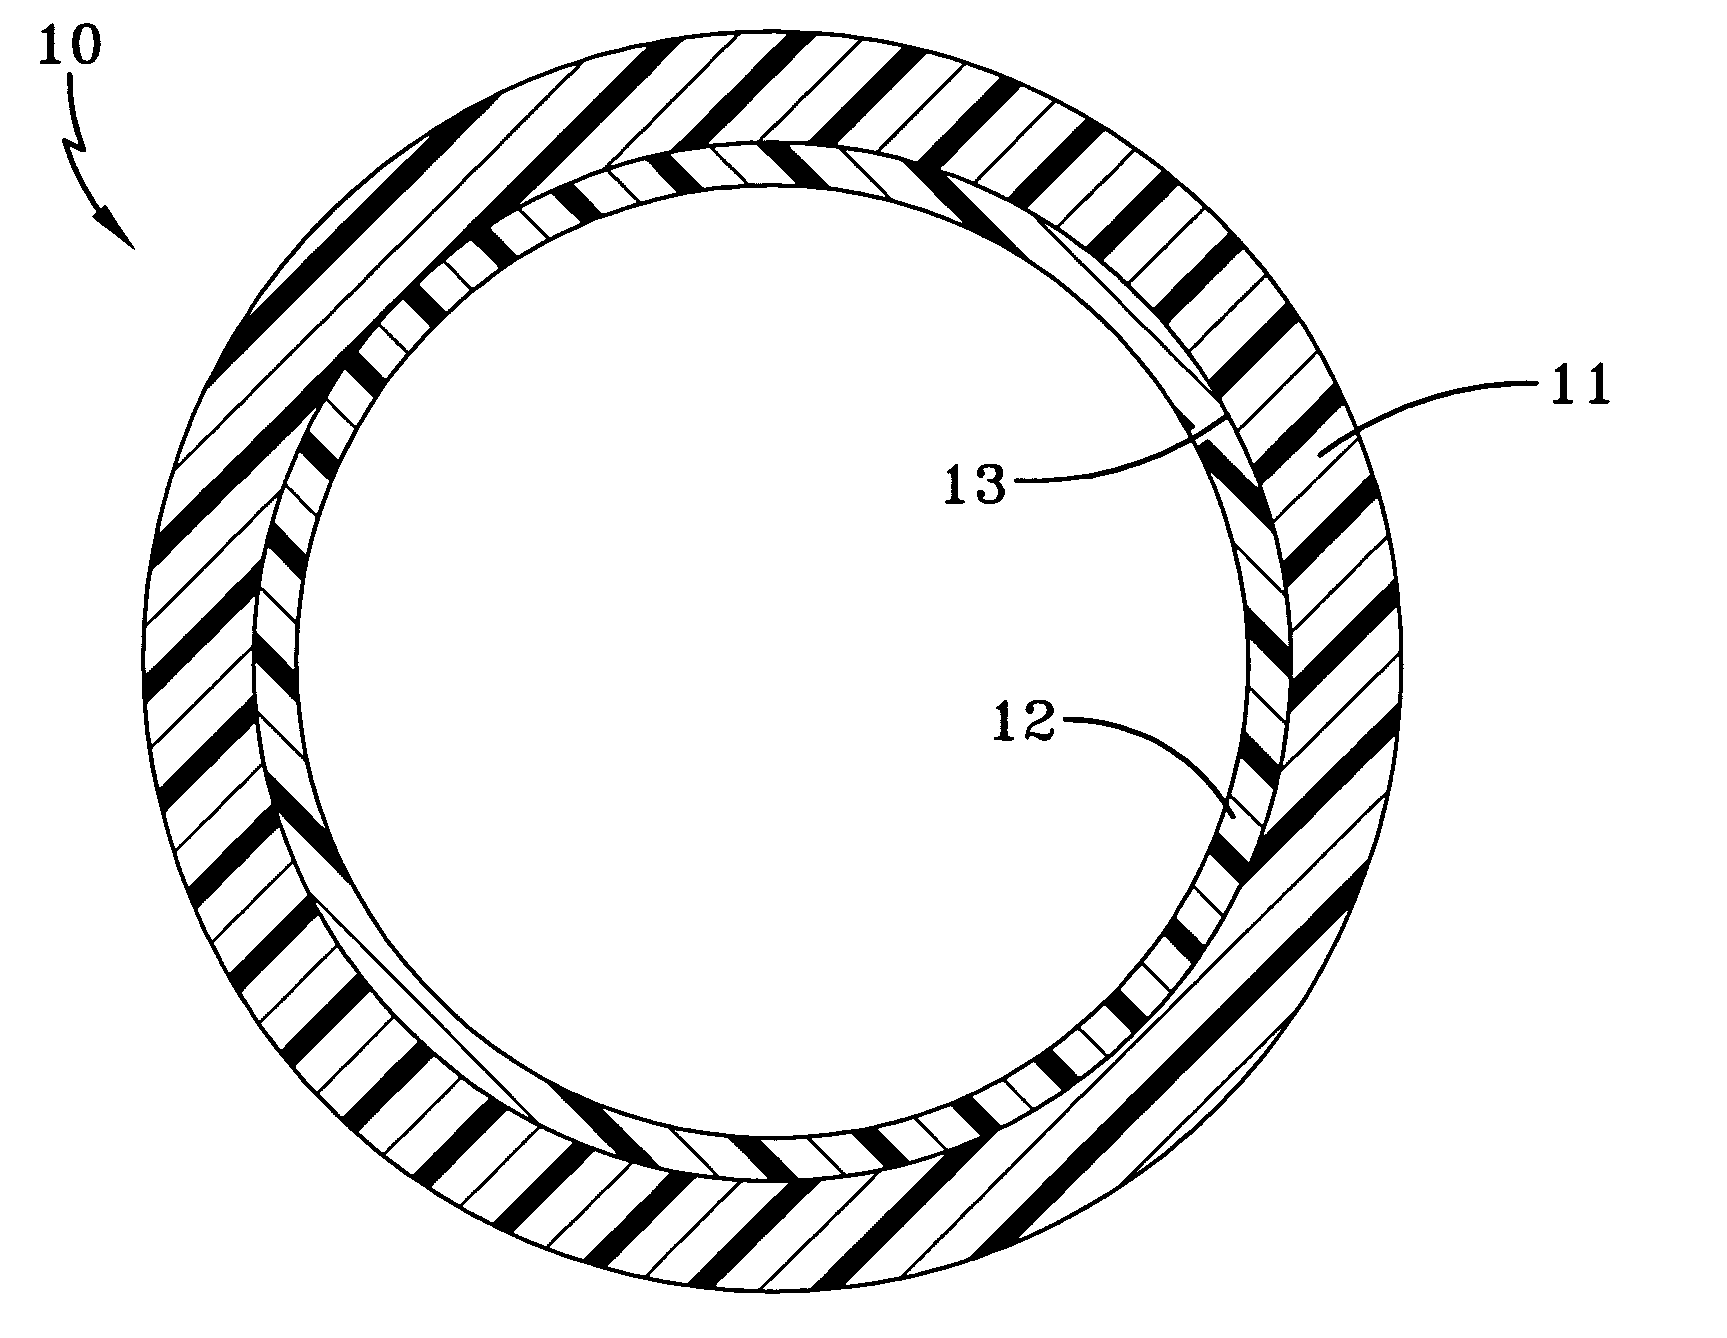 Polyefinic pipe having a chlorinated polyolefinic hollow core